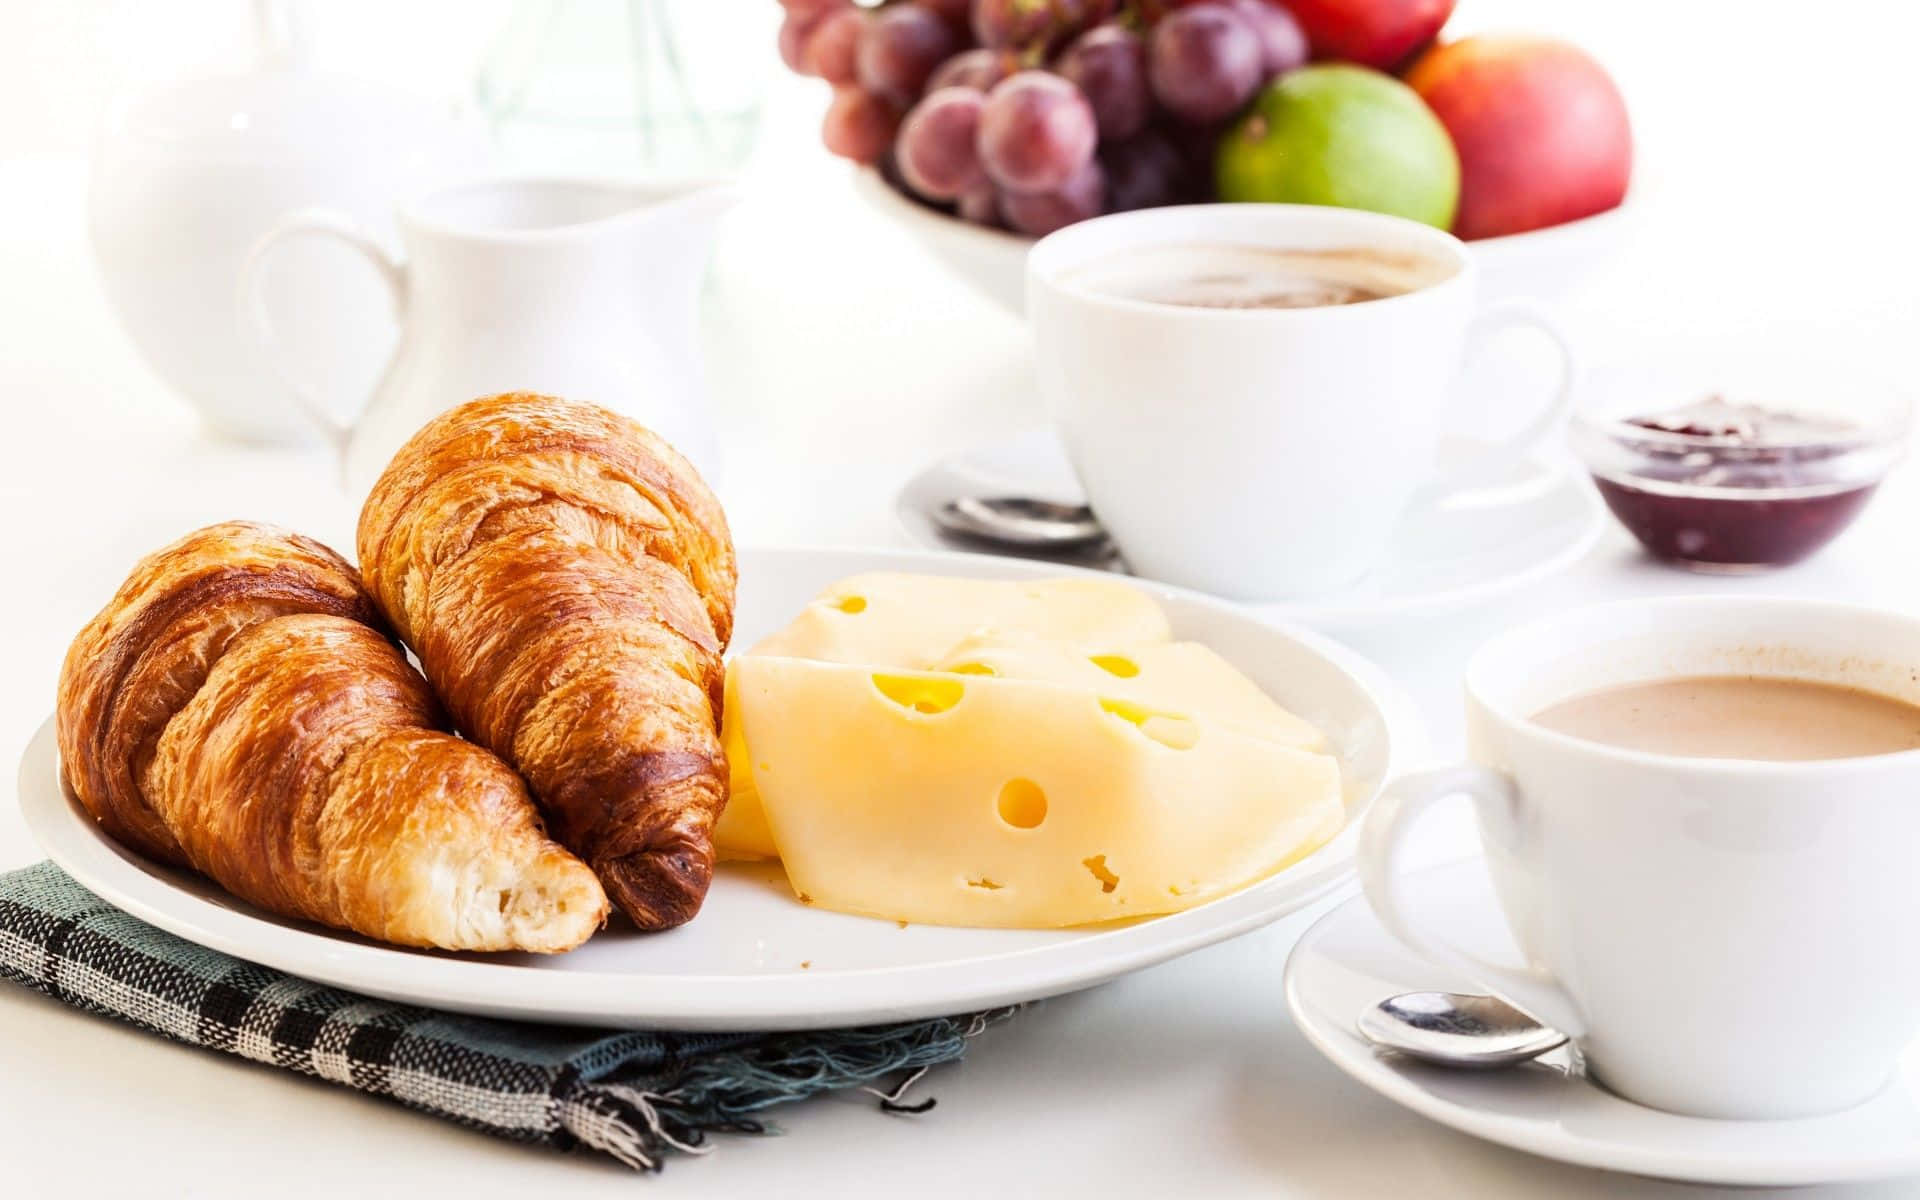 A delectable morning spread: fruits, coffee, and croissant